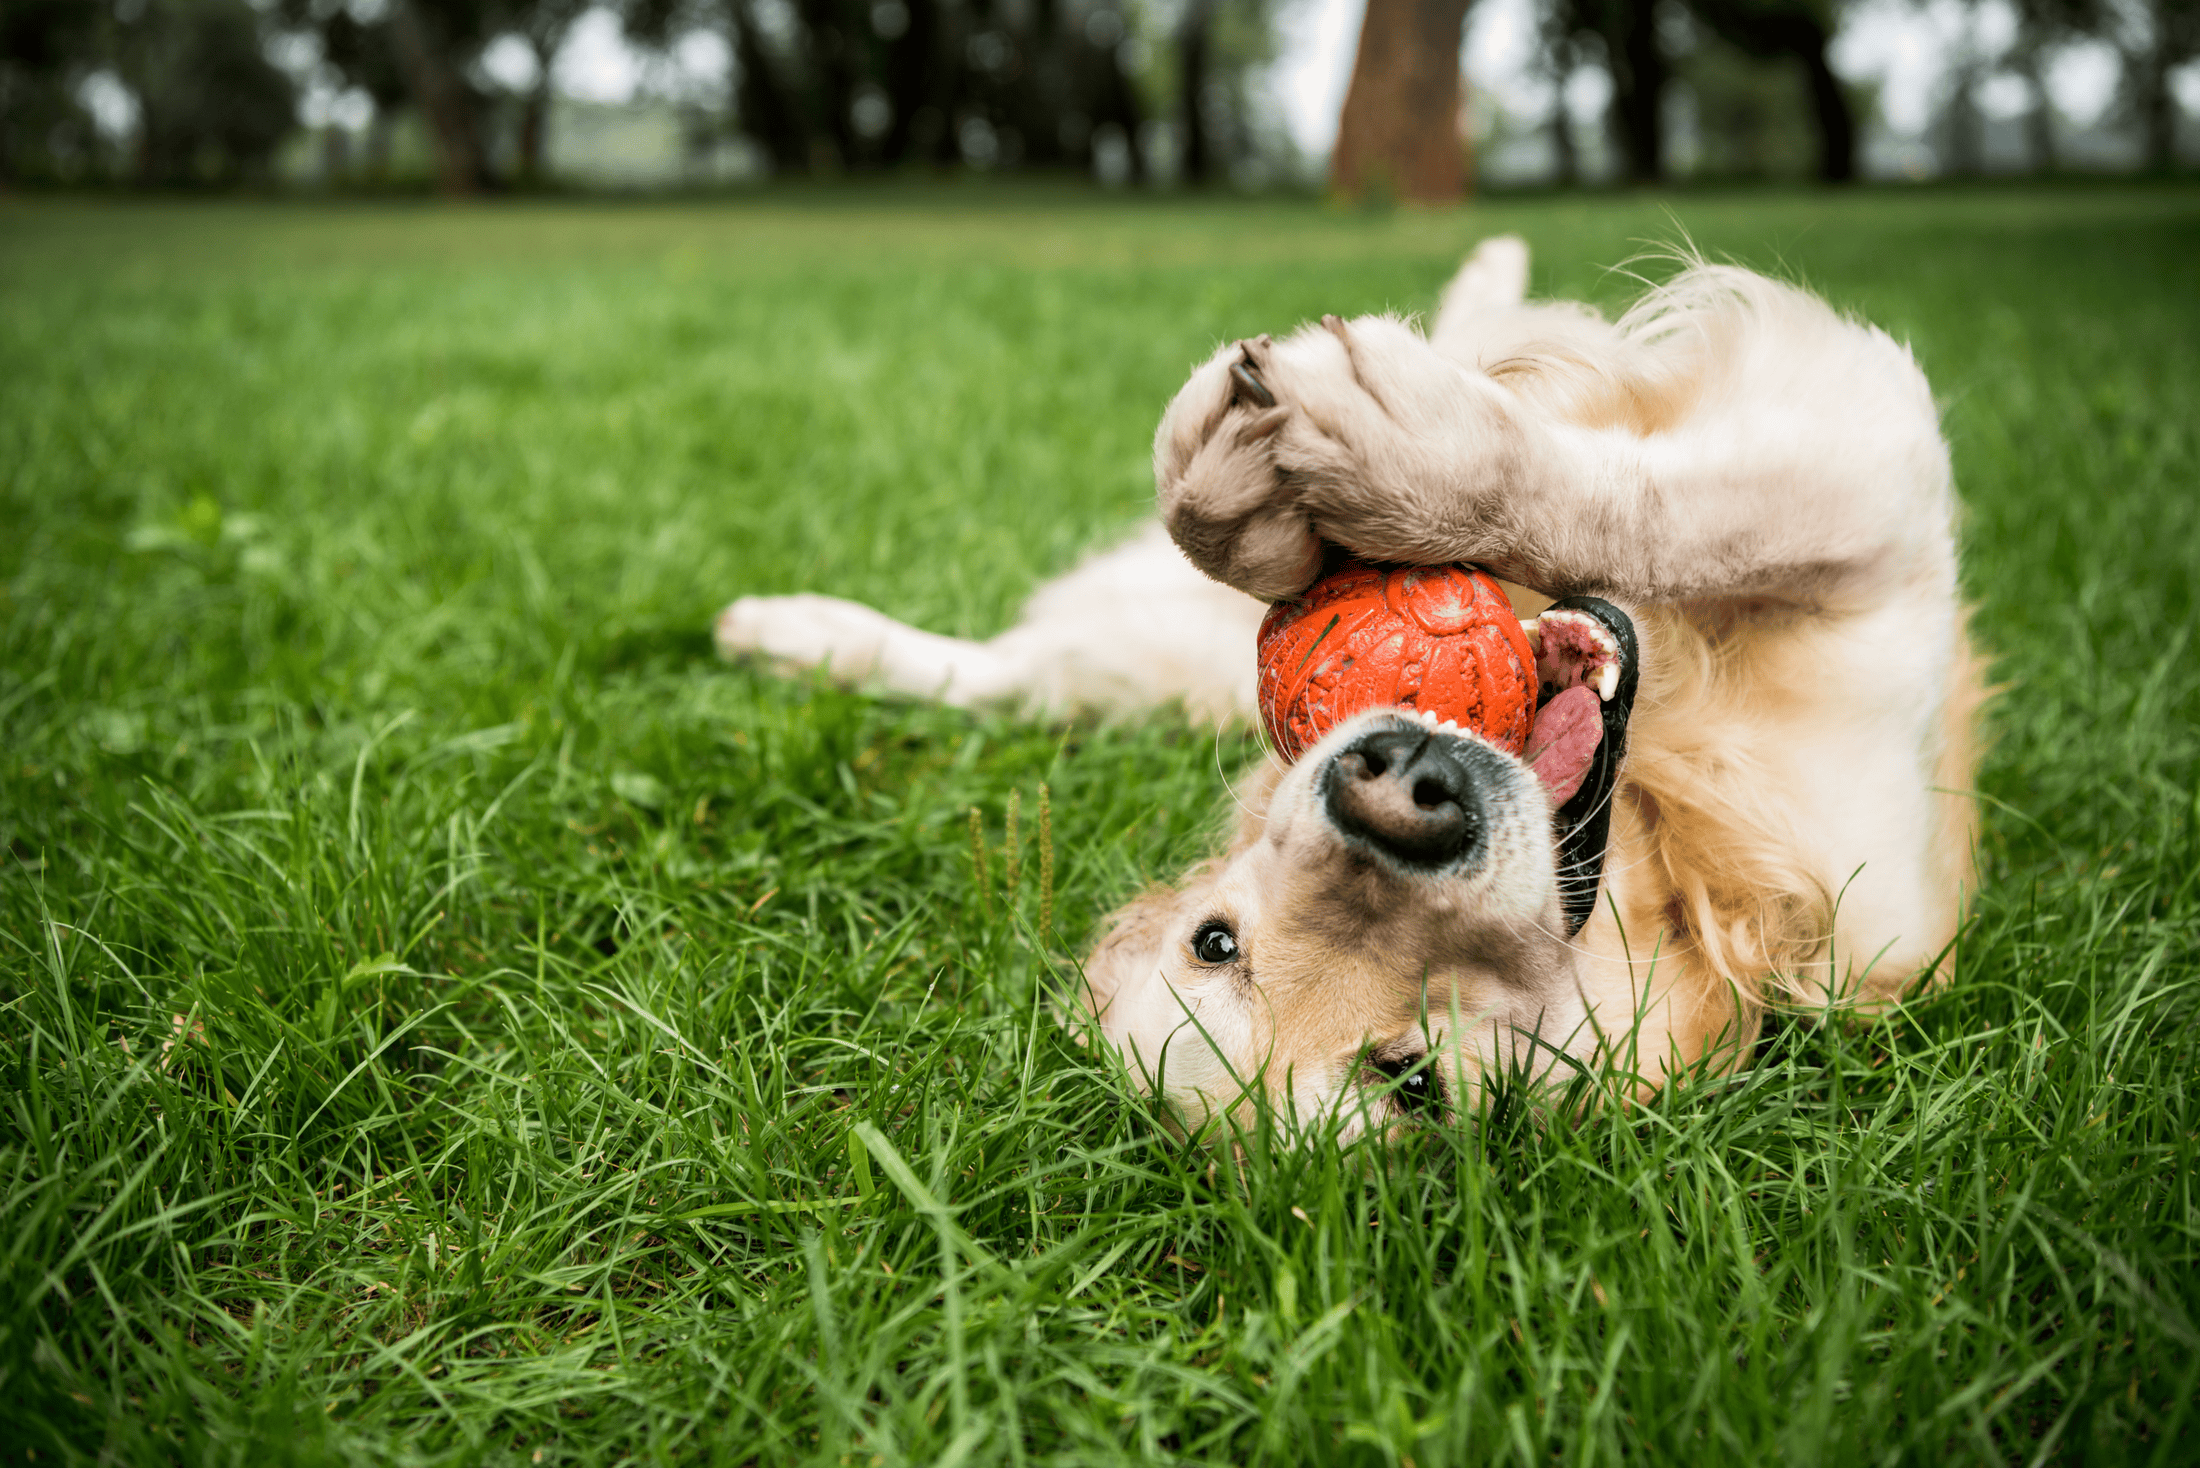 Does your dog listen at home but not so much at the dog park? 